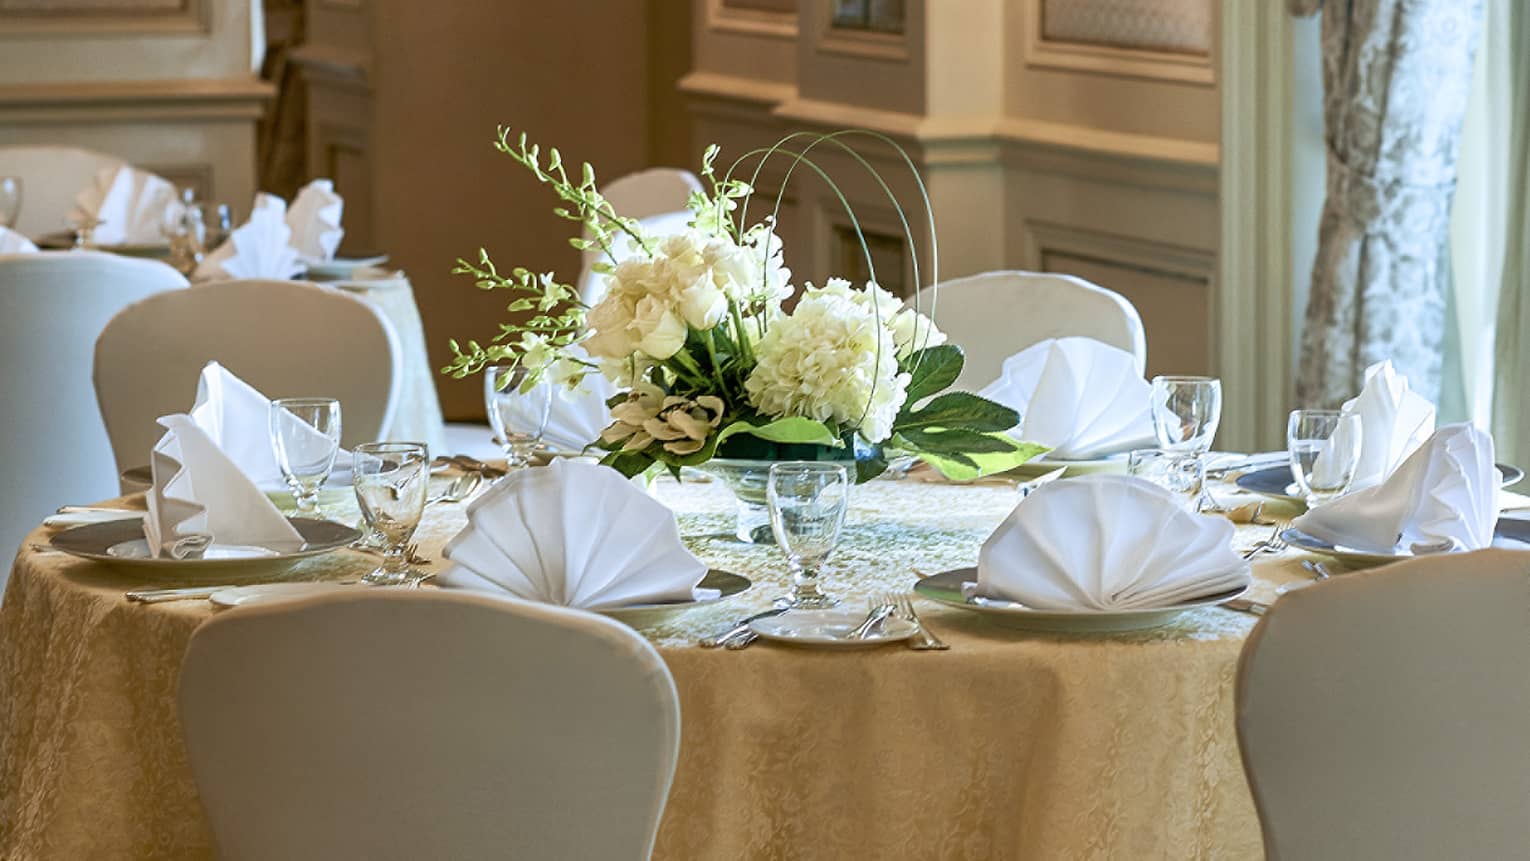 Close-up of banquet dining table with place settings, white flowers, napkins folded like fans 